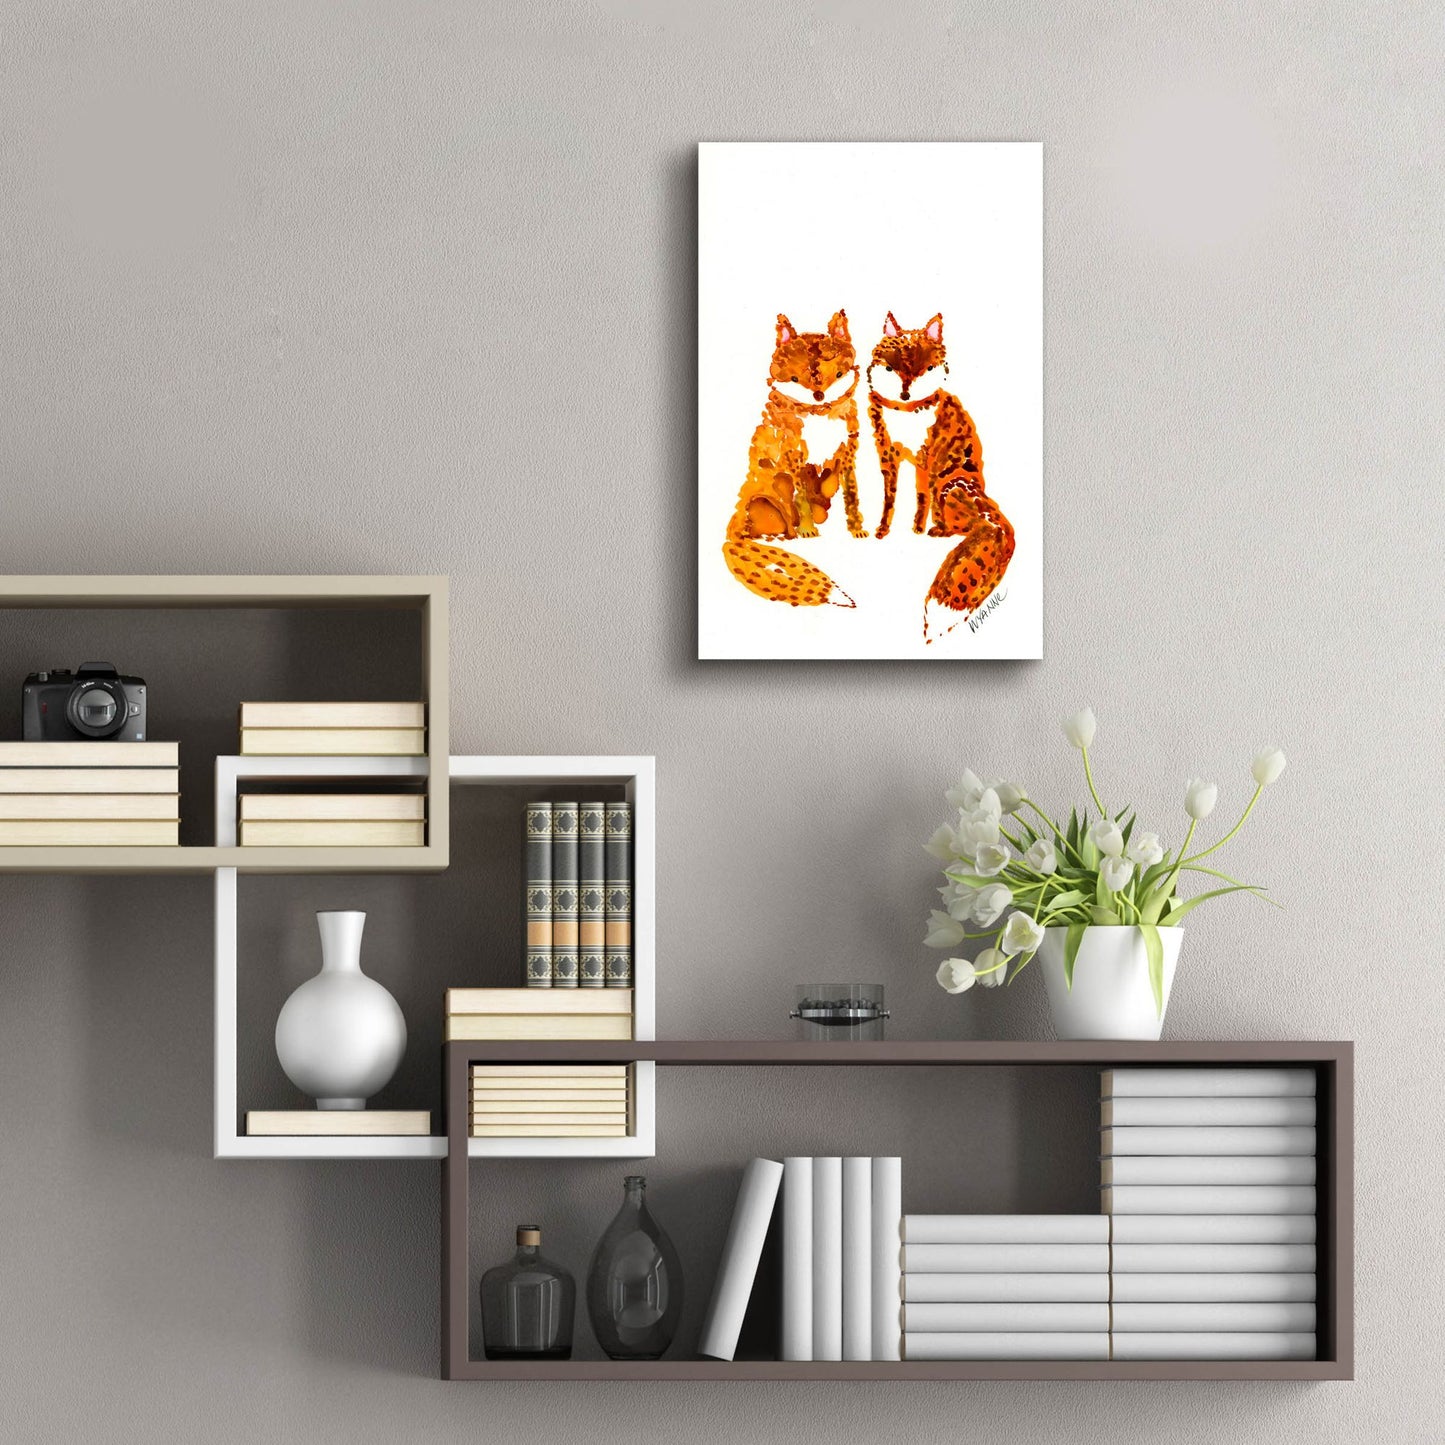 Epic Art 'Two Baby Foxes' by Wyanne, Acrylic Glass Wall Art,16x24